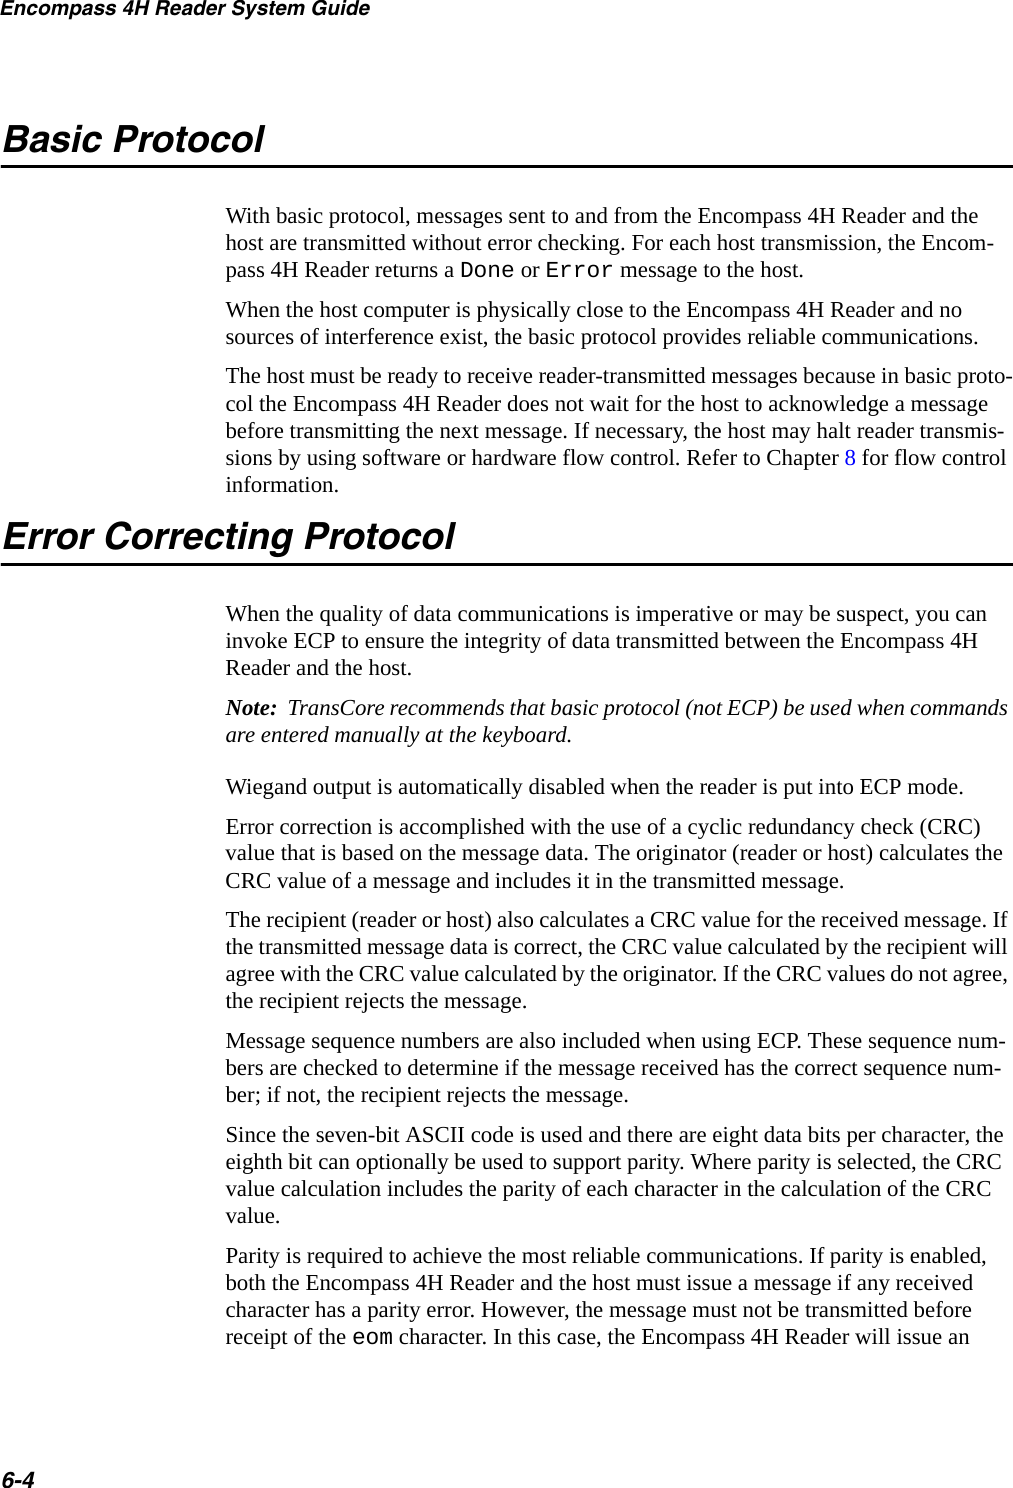 Encompass 4H Reader System Guide6-4Basic ProtocolWith basic protocol, messages sent to and from the Encompass 4H Reader and the host are transmitted without error checking. For each host transmission, the Encom-pass 4H Reader returns a Done or Error message to the host.When the host computer is physically close to the Encompass 4H Reader and no sources of interference exist, the basic protocol provides reliable communications.The host must be ready to receive reader-transmitted messages because in basic proto-col the Encompass 4H Reader does not wait for the host to acknowledge a message before transmitting the next message. If necessary, the host may halt reader transmis-sions by using software or hardware flow control. Refer to Chapter 8 for flow control information.Error Correcting ProtocolWhen the quality of data communications is imperative or may be suspect, you can invoke ECP to ensure the integrity of data transmitted between the Encompass 4H Reader and the host. Note:  TransCore recommends that basic protocol (not ECP) be used when commands are entered manually at the keyboard.Wiegand output is automatically disabled when the reader is put into ECP mode.Error correction is accomplished with the use of a cyclic redundancy check (CRC) value that is based on the message data. The originator (reader or host) calculates the CRC value of a message and includes it in the transmitted message.The recipient (reader or host) also calculates a CRC value for the received message. If the transmitted message data is correct, the CRC value calculated by the recipient will agree with the CRC value calculated by the originator. If the CRC values do not agree, the recipient rejects the message.Message sequence numbers are also included when using ECP. These sequence num-bers are checked to determine if the message received has the correct sequence num-ber; if not, the recipient rejects the message.Since the seven-bit ASCII code is used and there are eight data bits per character, the eighth bit can optionally be used to support parity. Where parity is selected, the CRC value calculation includes the parity of each character in the calculation of the CRC value.Parity is required to achieve the most reliable communications. If parity is enabled, both the Encompass 4H Reader and the host must issue a message if any received character has a parity error. However, the message must not be transmitted before receipt of the eom character. In this case, the Encompass 4H Reader will issue an 